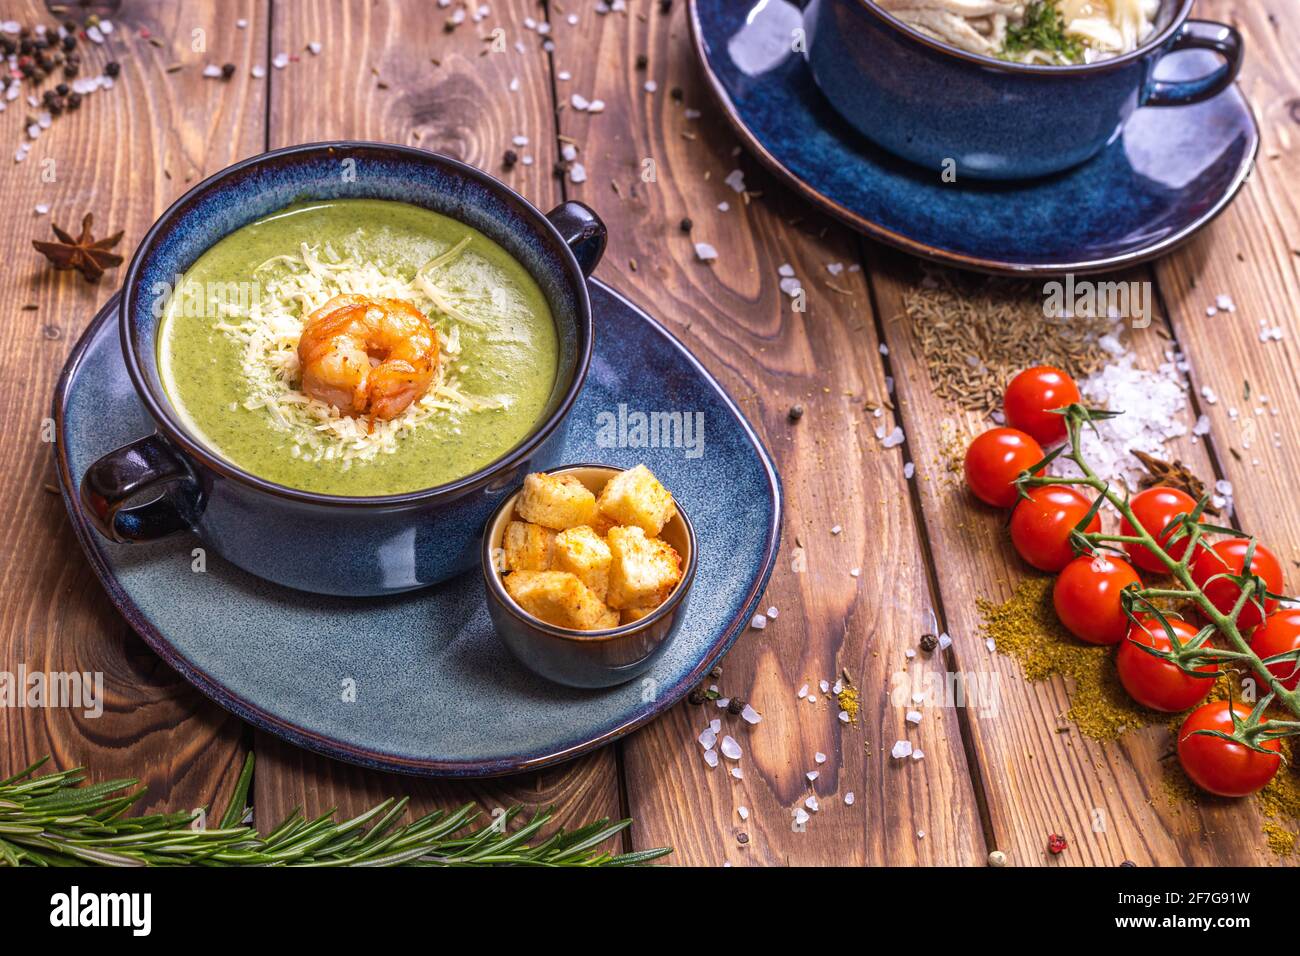 Mashed soup with shrimp, croutons and cherry tomatoes on a brown wooden background decorated with spices, rosemary, coarse salt. Top view. Stock Photo